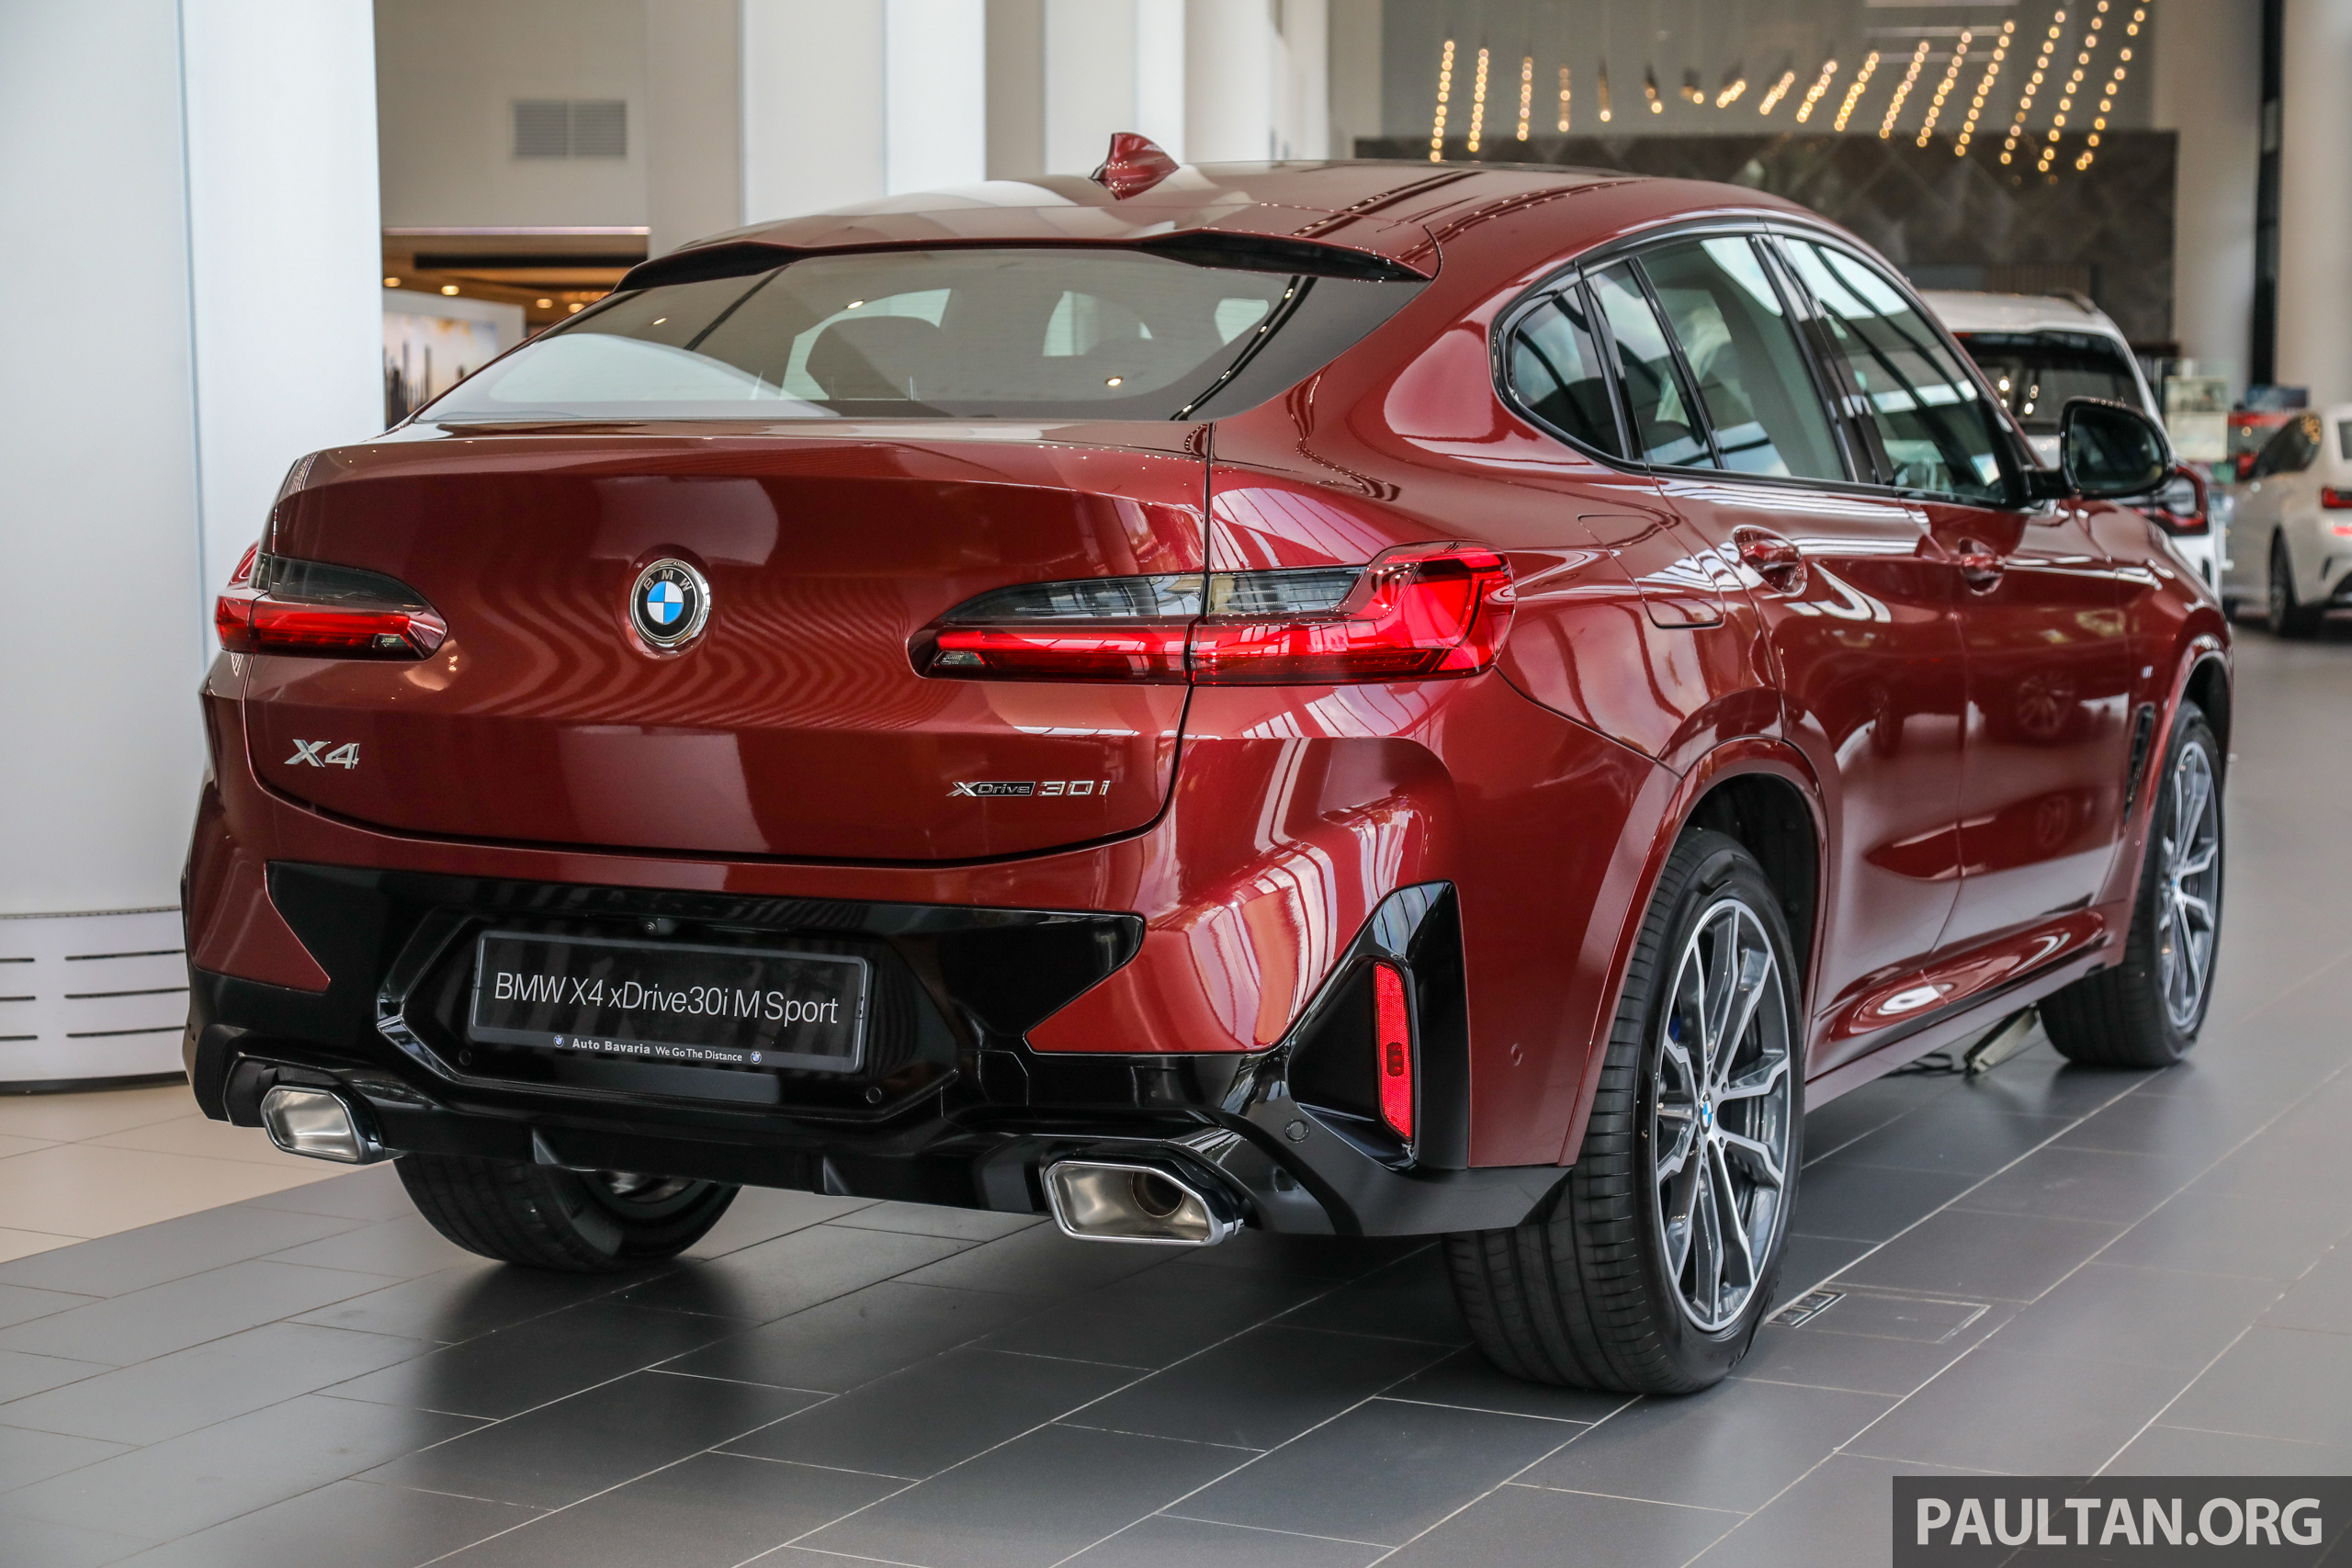 2022 Bmw X4 Facelift In Malaysia - Full Live Gallery Of The G02 'X3 Coupe'  In Xdrive30I M Sport Form, Rm387K - Paultan.Org